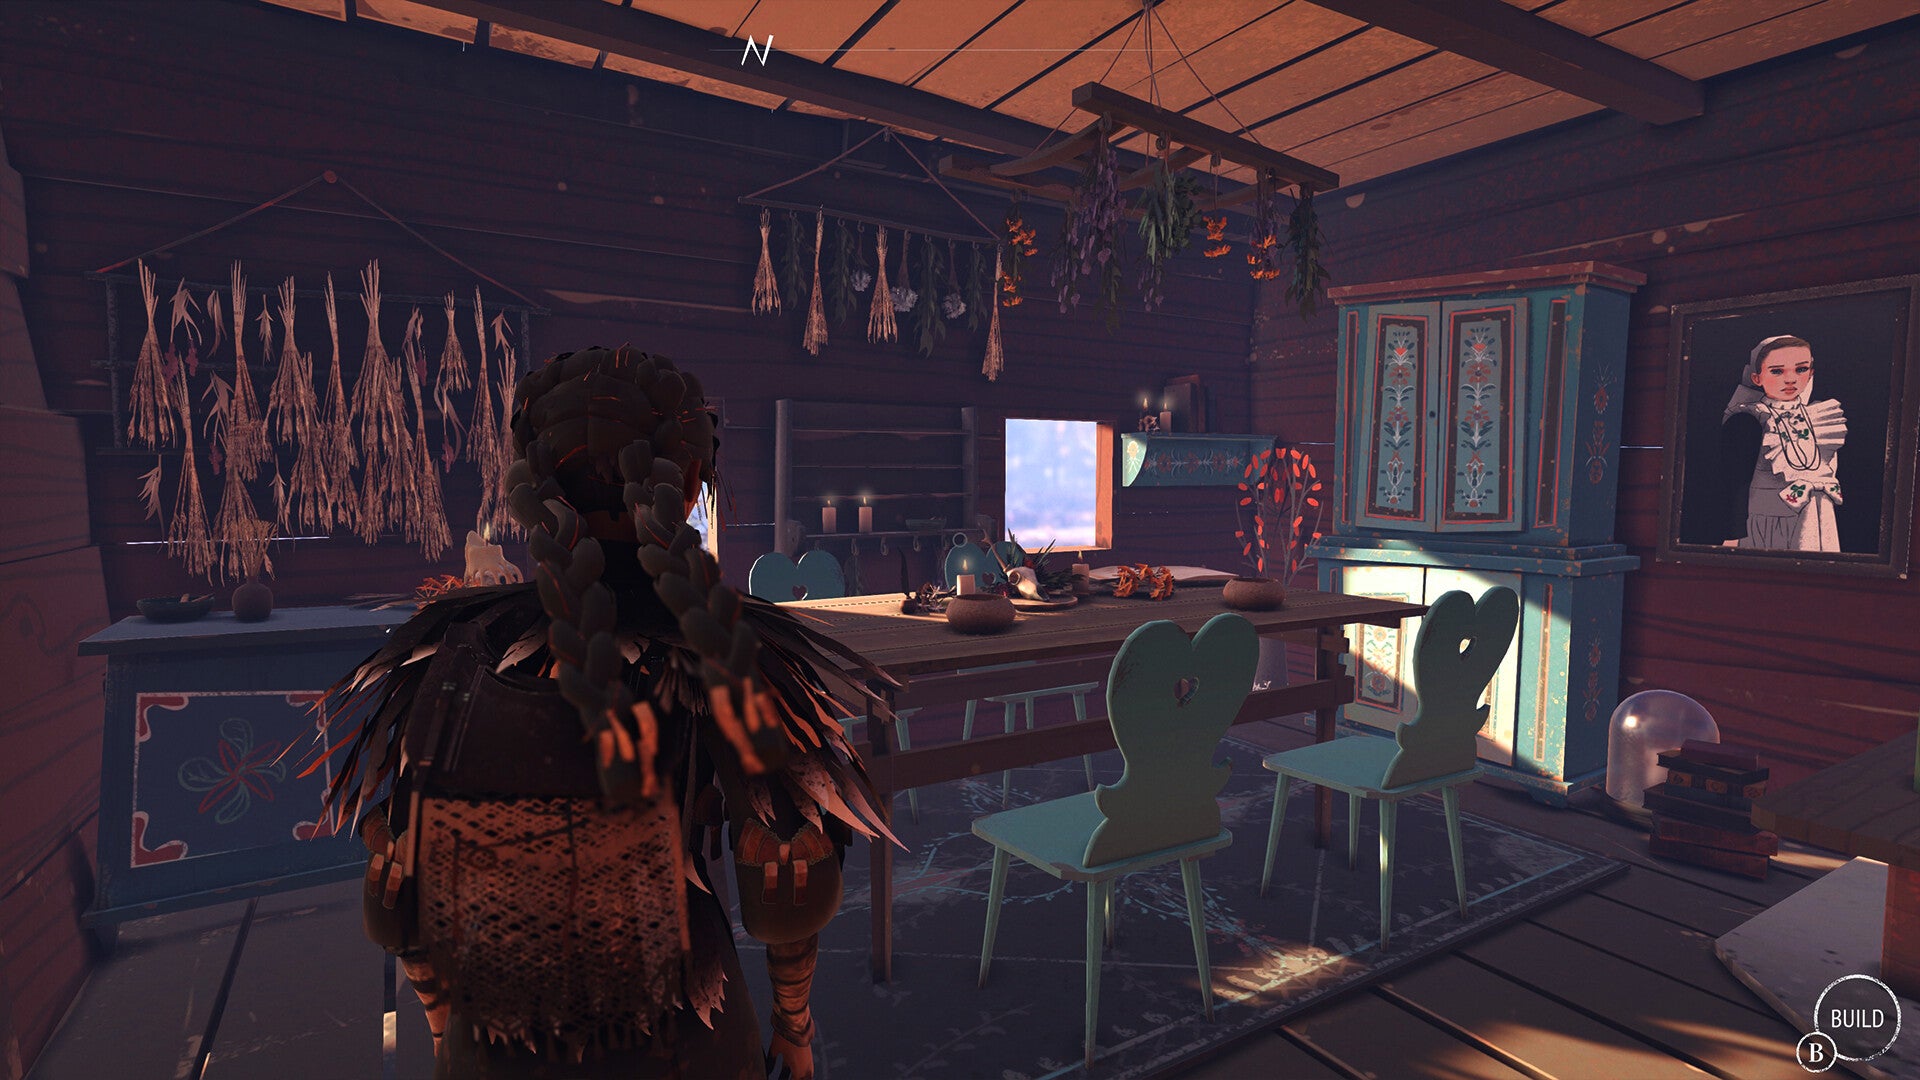 A Reka screenshot showing the inside of a cosy cottage complete with hanging herbs and a dinning table.